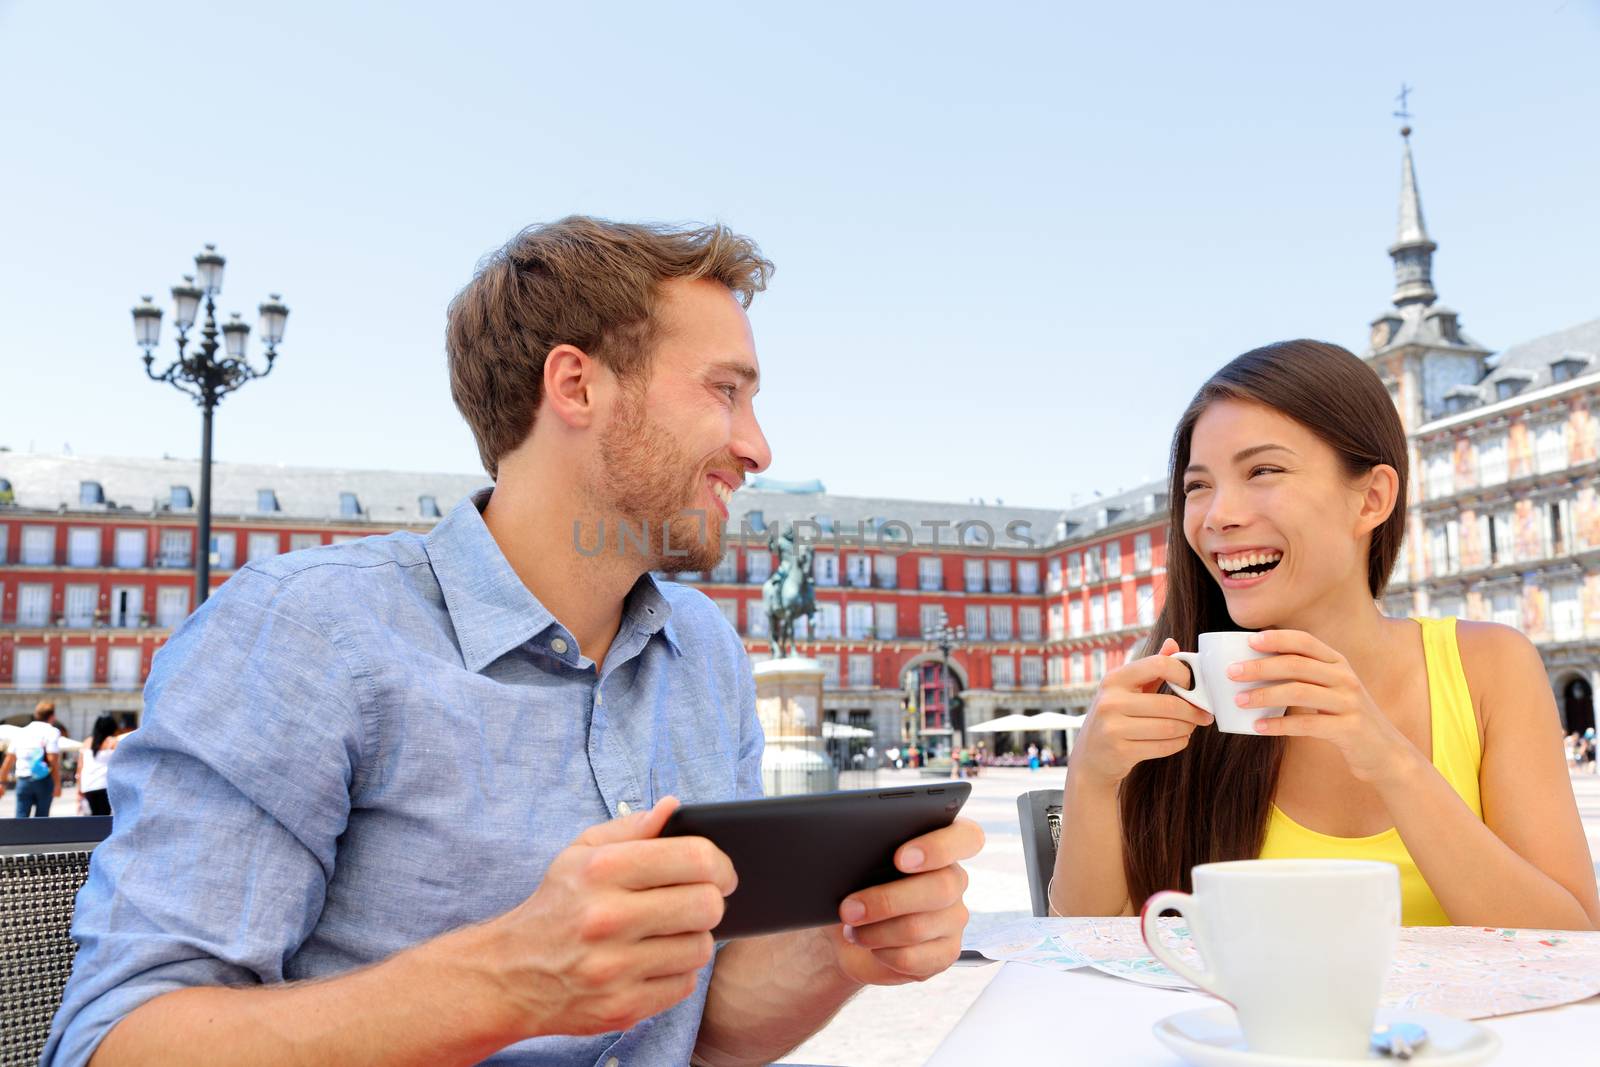 Madrid tourists at cafe drinking coffee having fun using tablet travel app on Plaza Mayor. Tourist couple sightseeing visiting tourism landmarks and attractions in Spain. Young woman and man